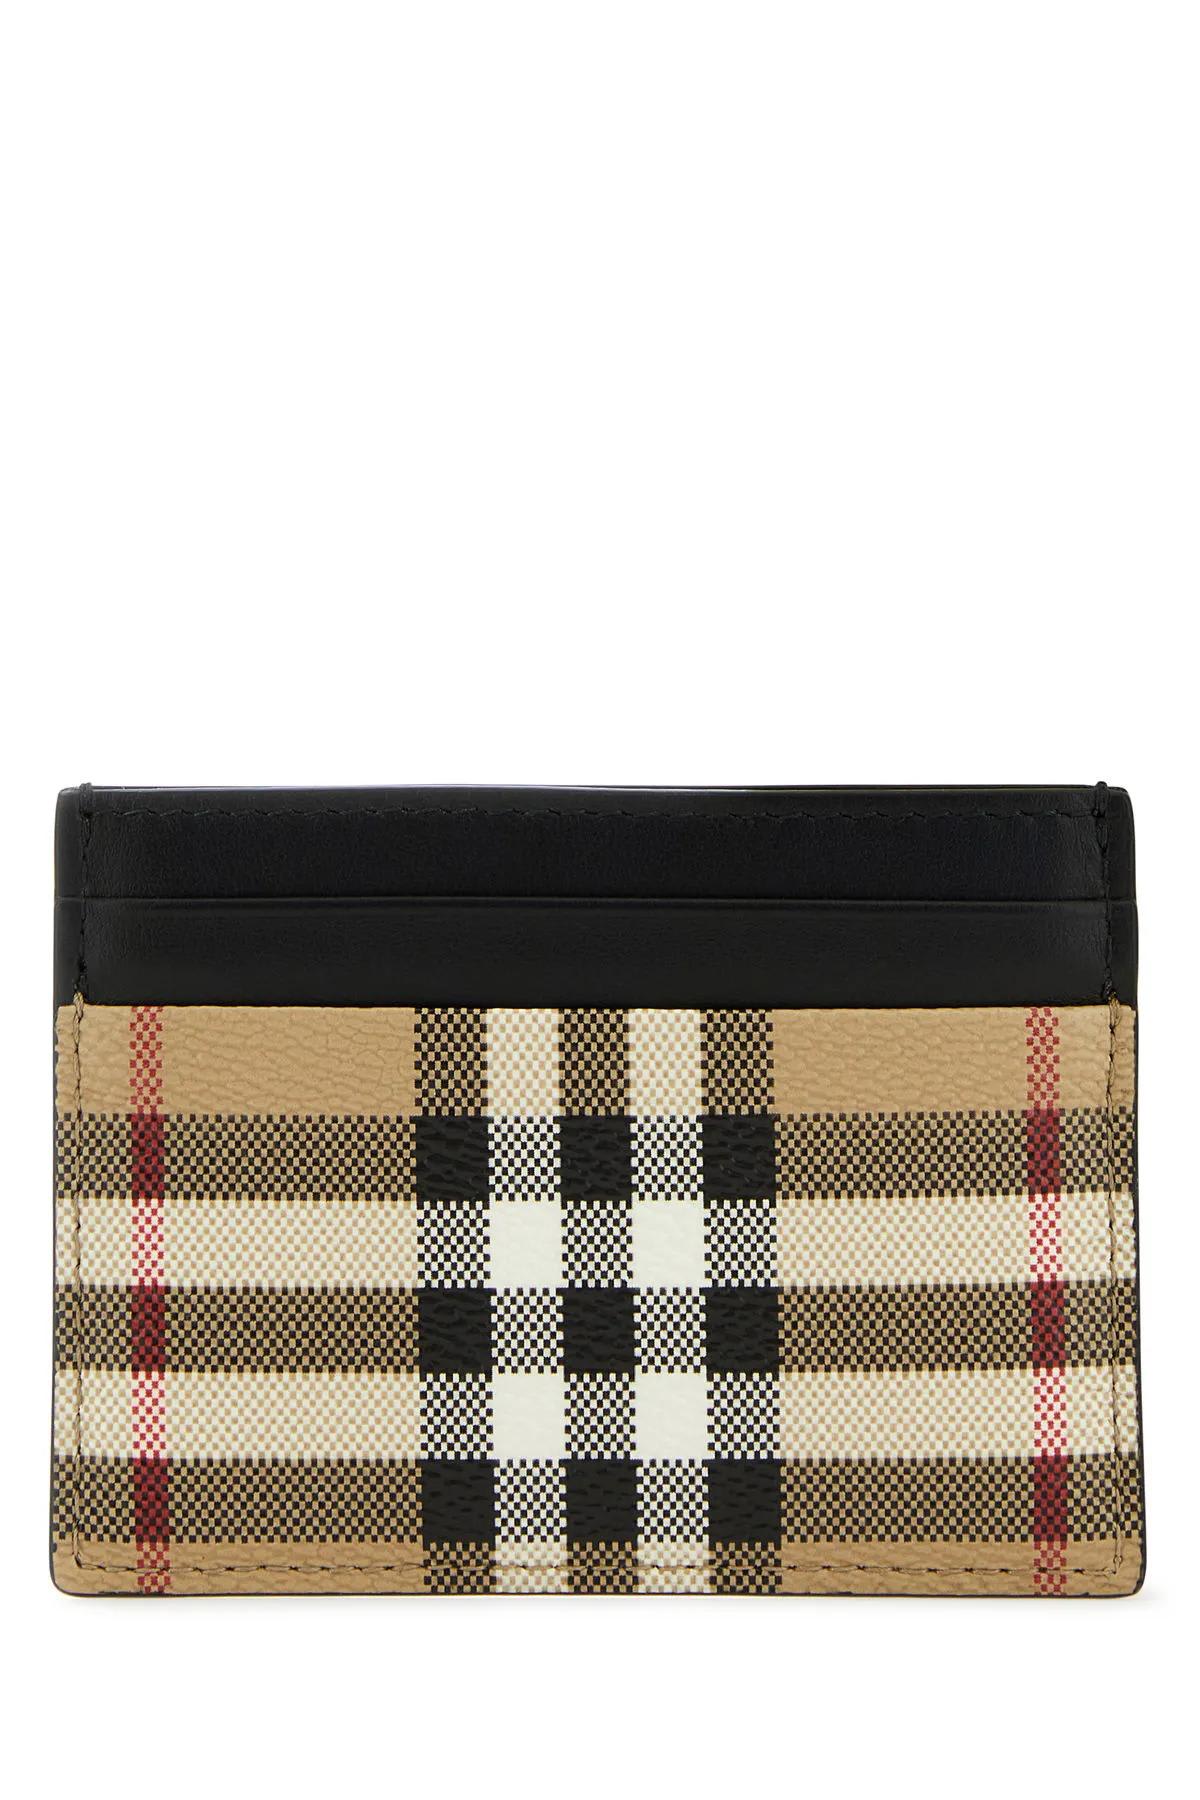 Burberry Printed Canvas Cardholder In Beige